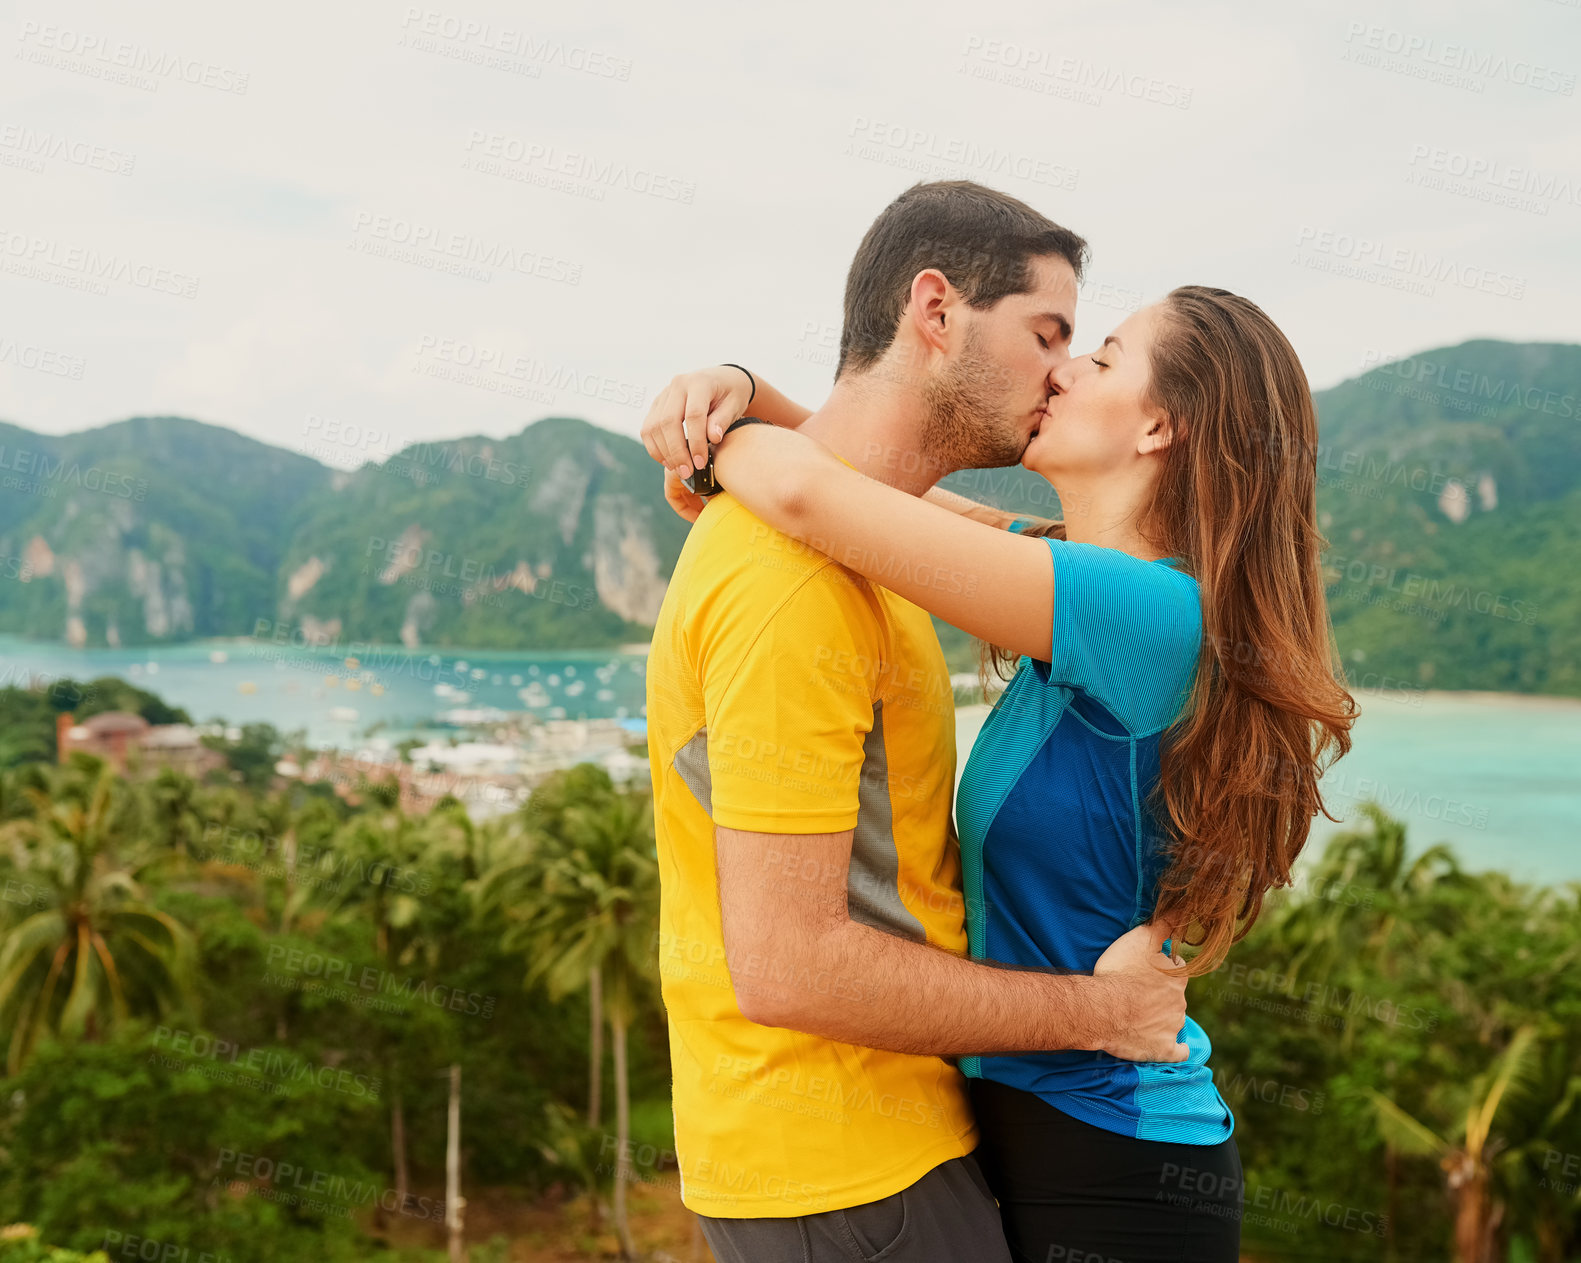 Buy stock photo Shot of a happy young couple kissing in front of an island landscape